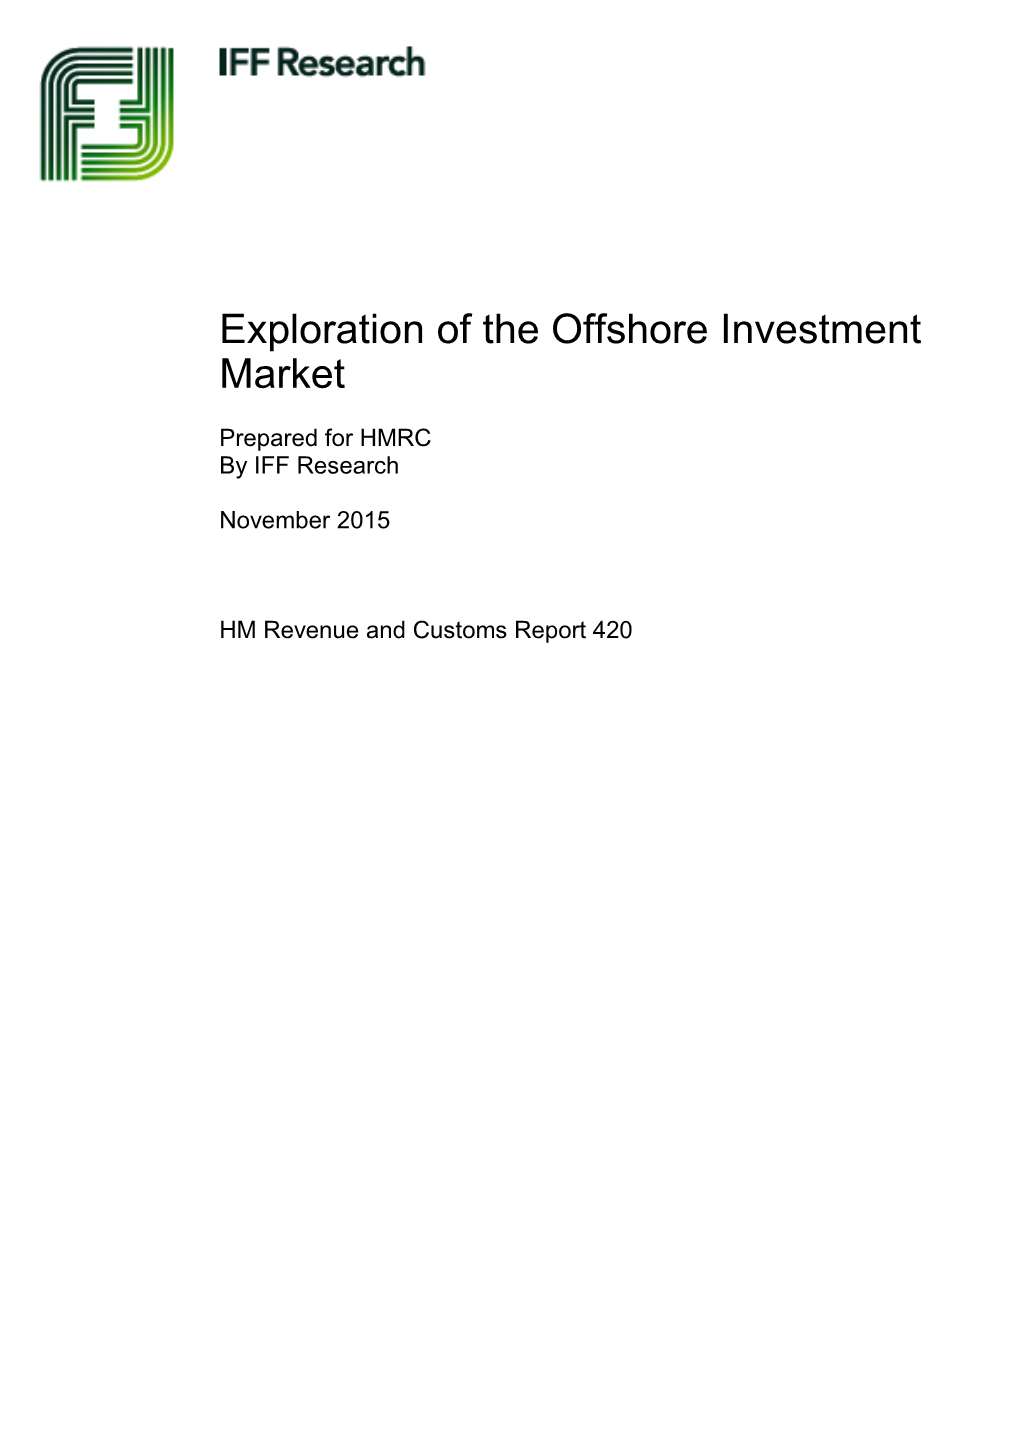 Exploration of the Offshore Investment Market